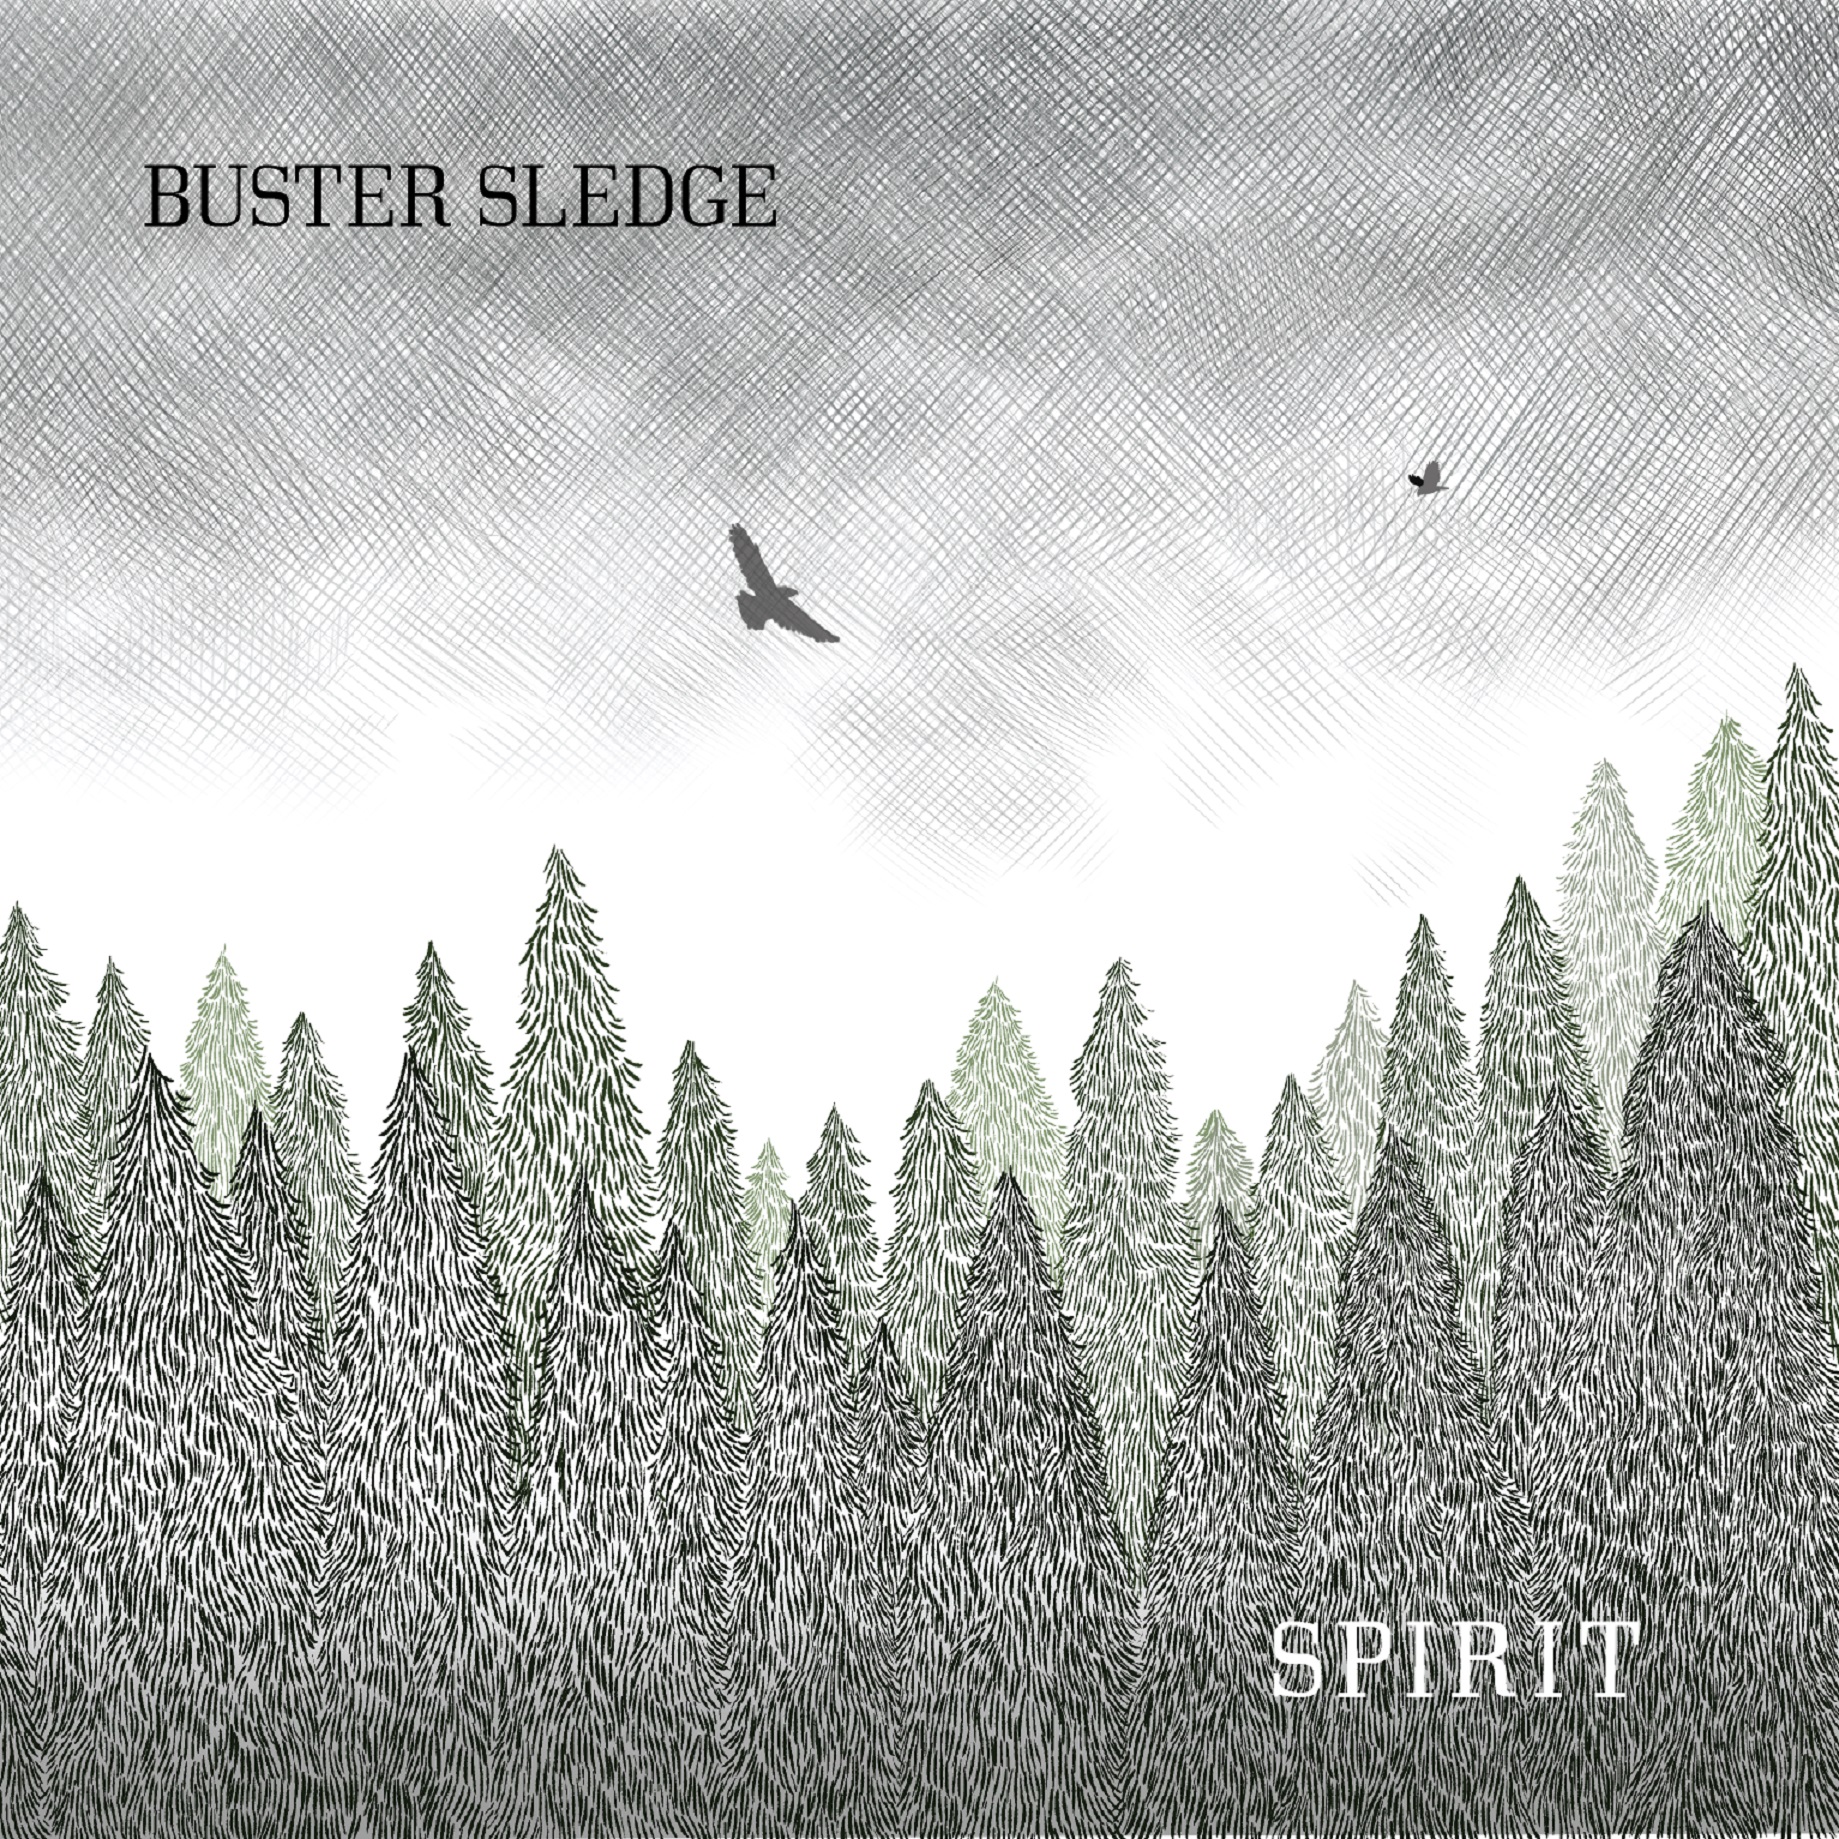 Buster Sledge's Debut Album 'Spirit' Out Now